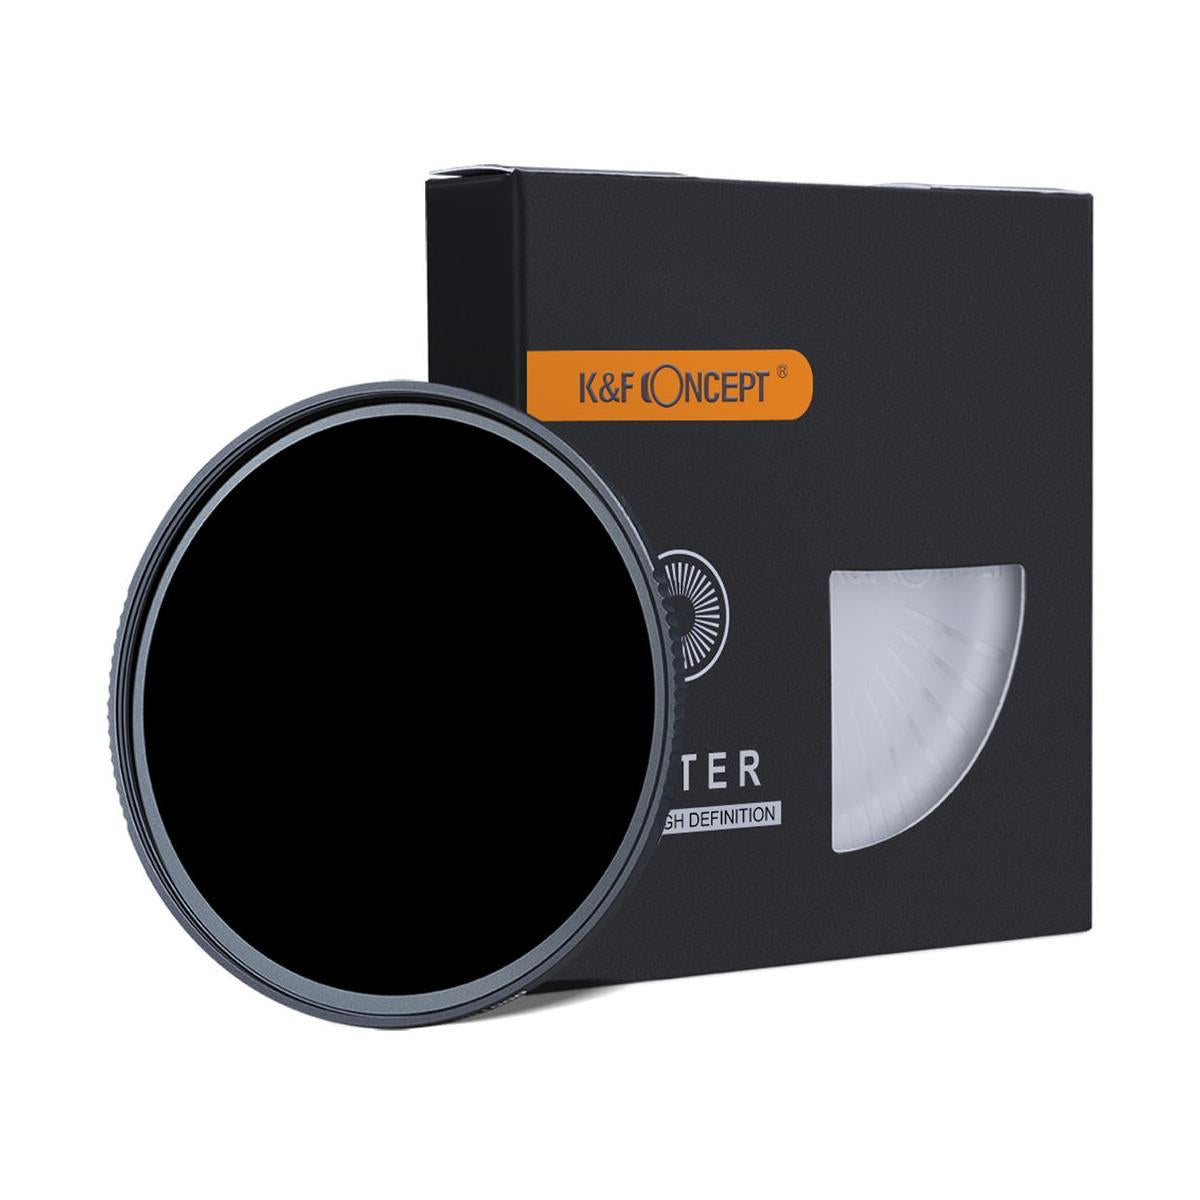 K&F Concept KF01-1232 Multiple Layer Coating Nano X ND1000, Water Resistant Optic Lens Filter, 55mm